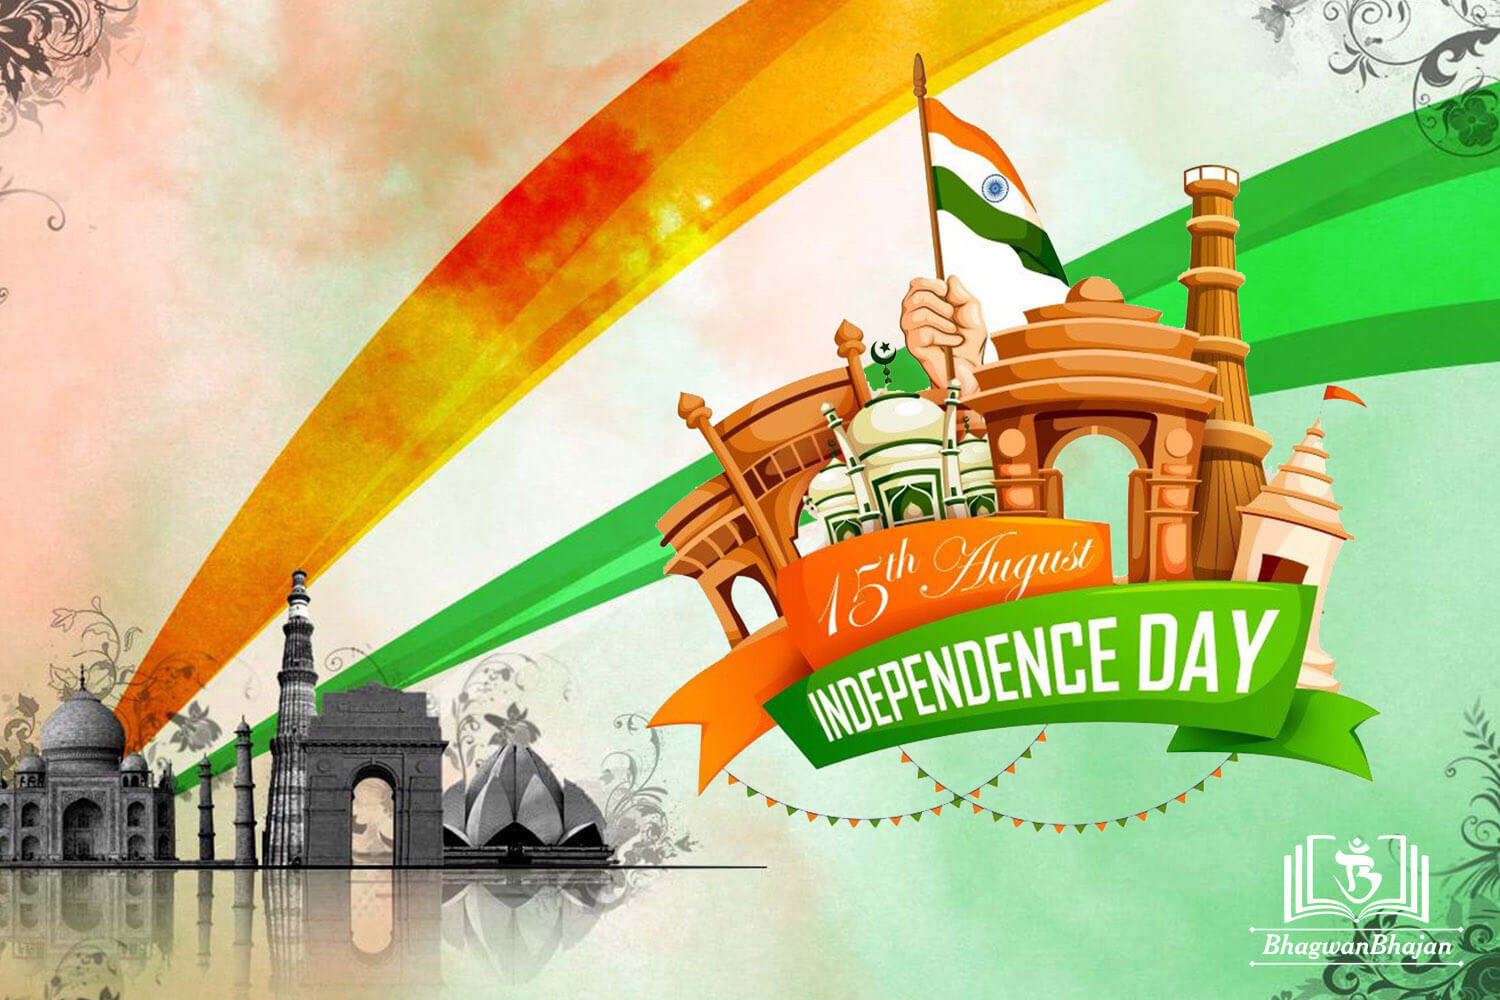 ndependence day wallpaper download hd